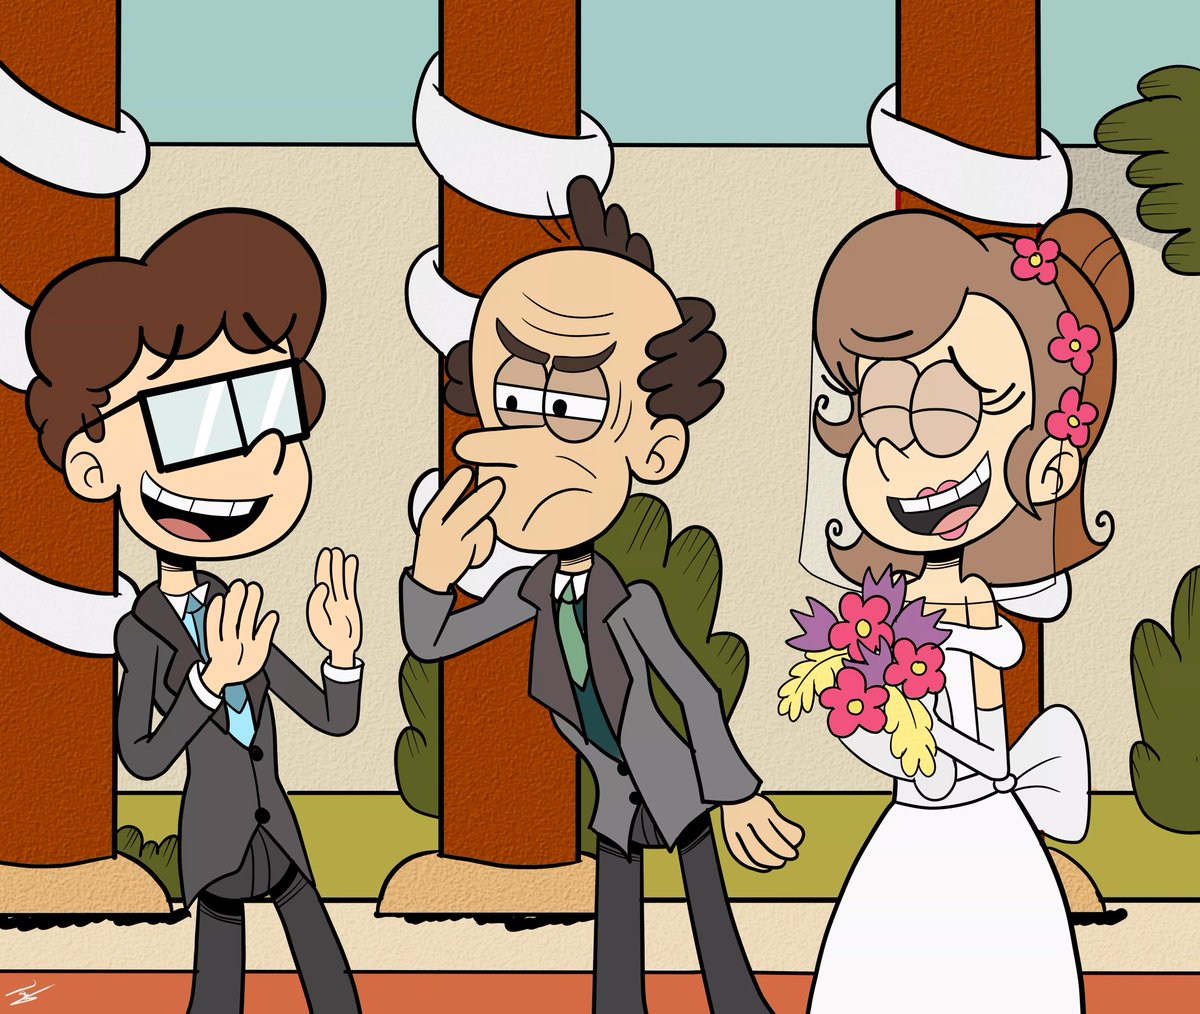 #luannyweek days 06 and 07 in one,
the father taking care of his daughter until his big day
#TheLoudHouse #Nickelodeon #luanloud #bennystein #lynnloudsr #wedding #fanart